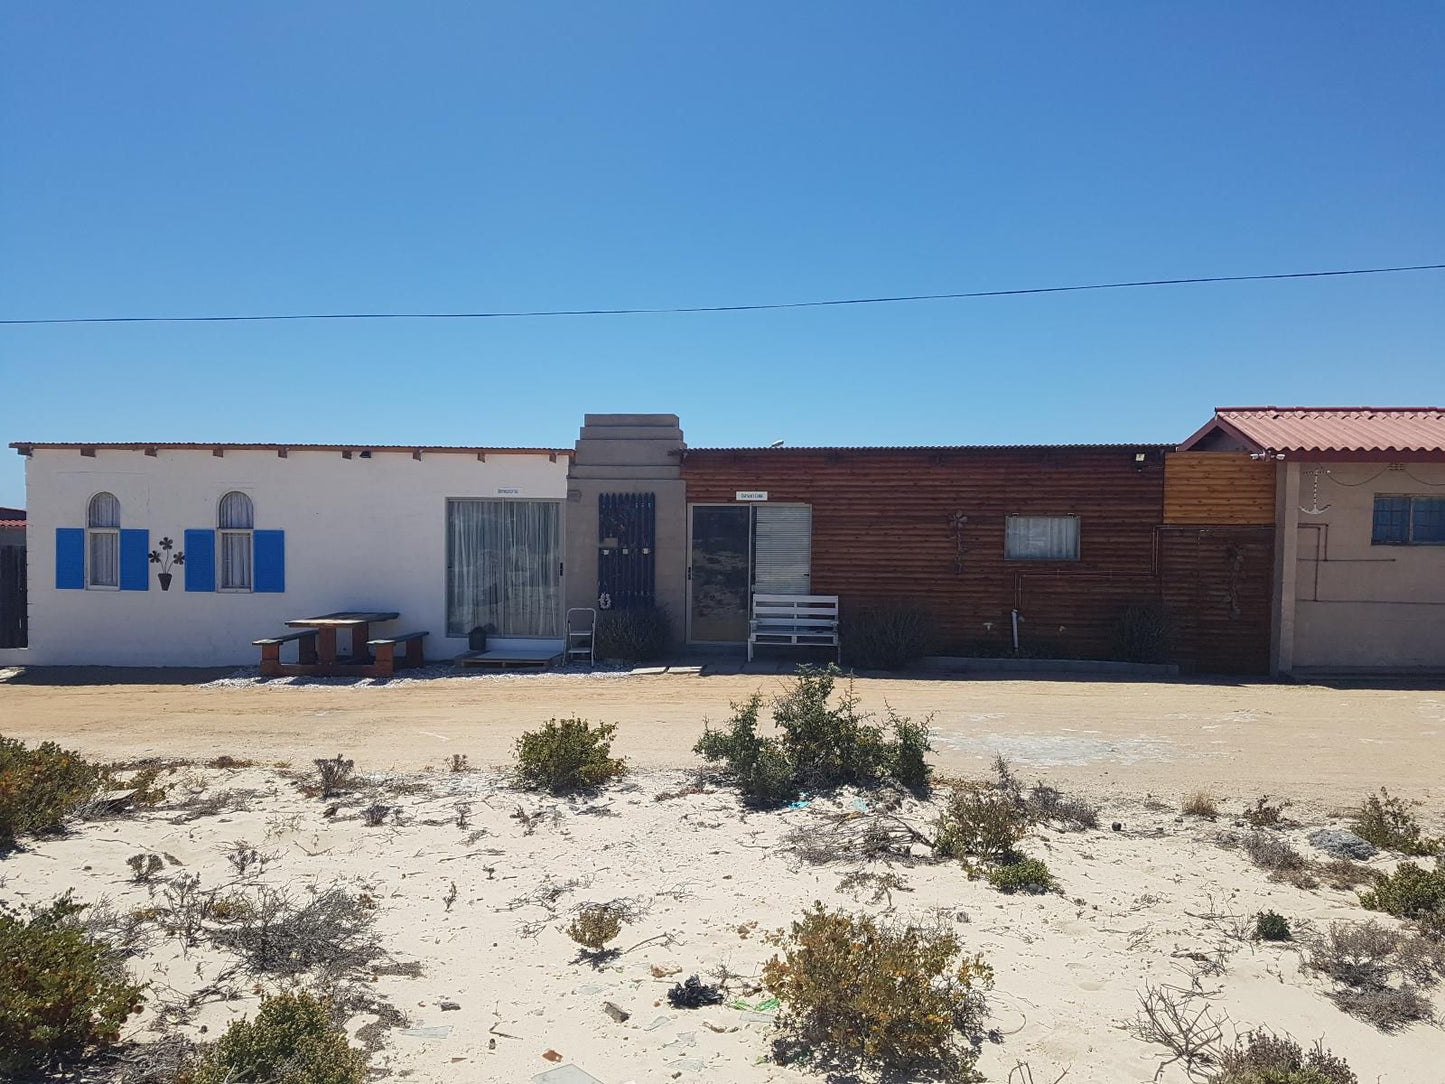 Seezightlaan Self Catering Units Kleinzee Northern Cape South Africa Beach, Nature, Sand, Shipping Container